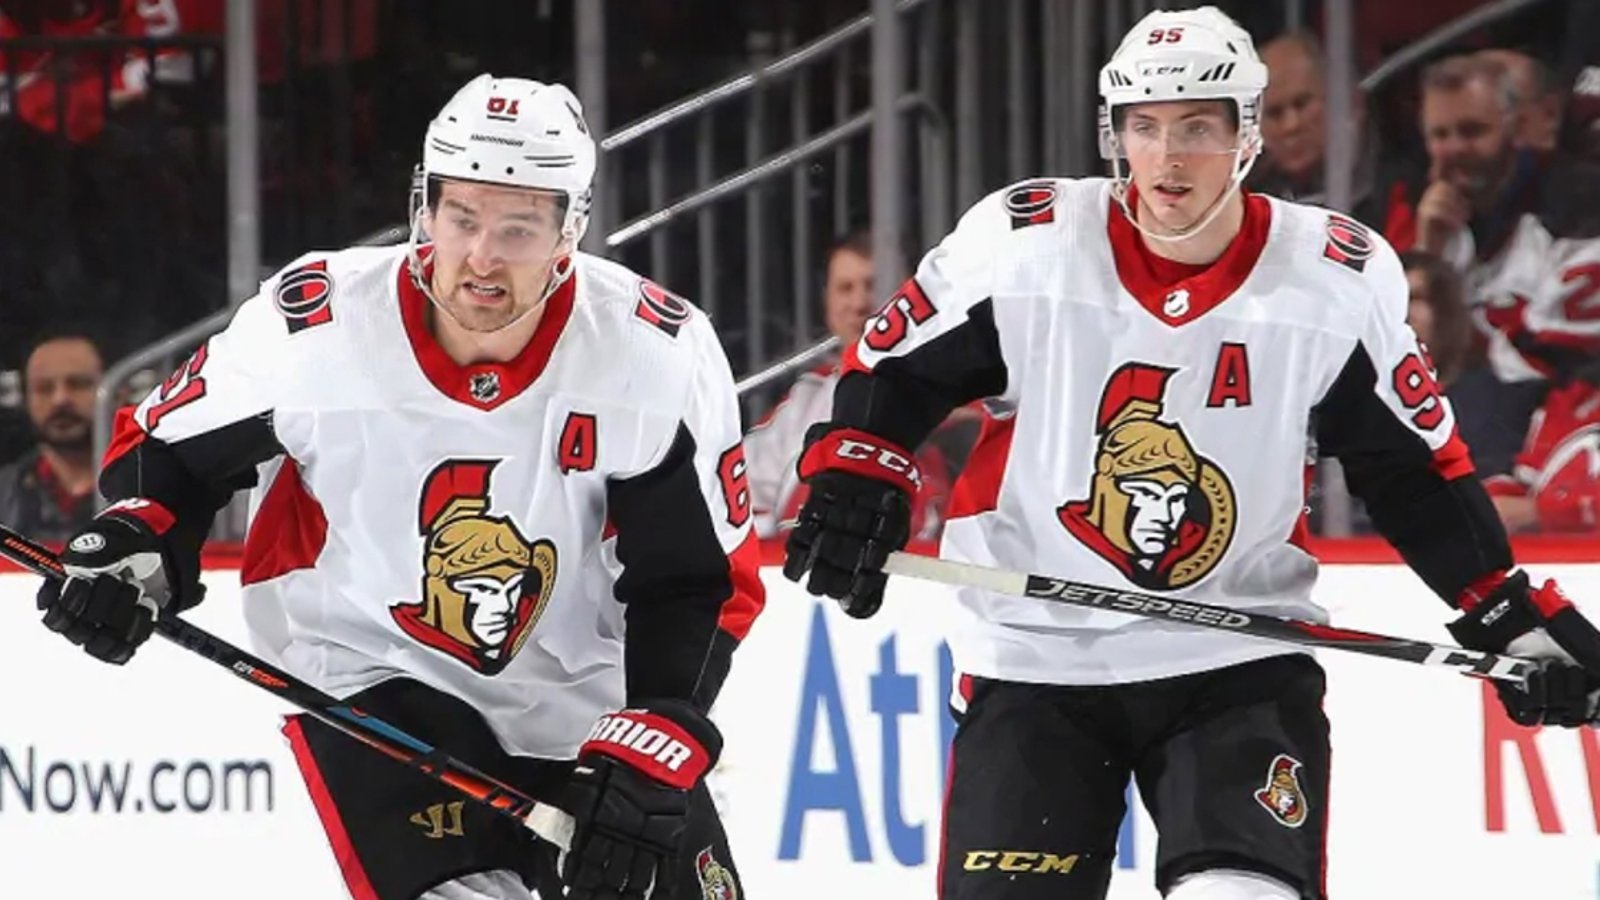 Breaking: Sens pull Duchene, Stone and Dzingel from lineup just prior to puck drop